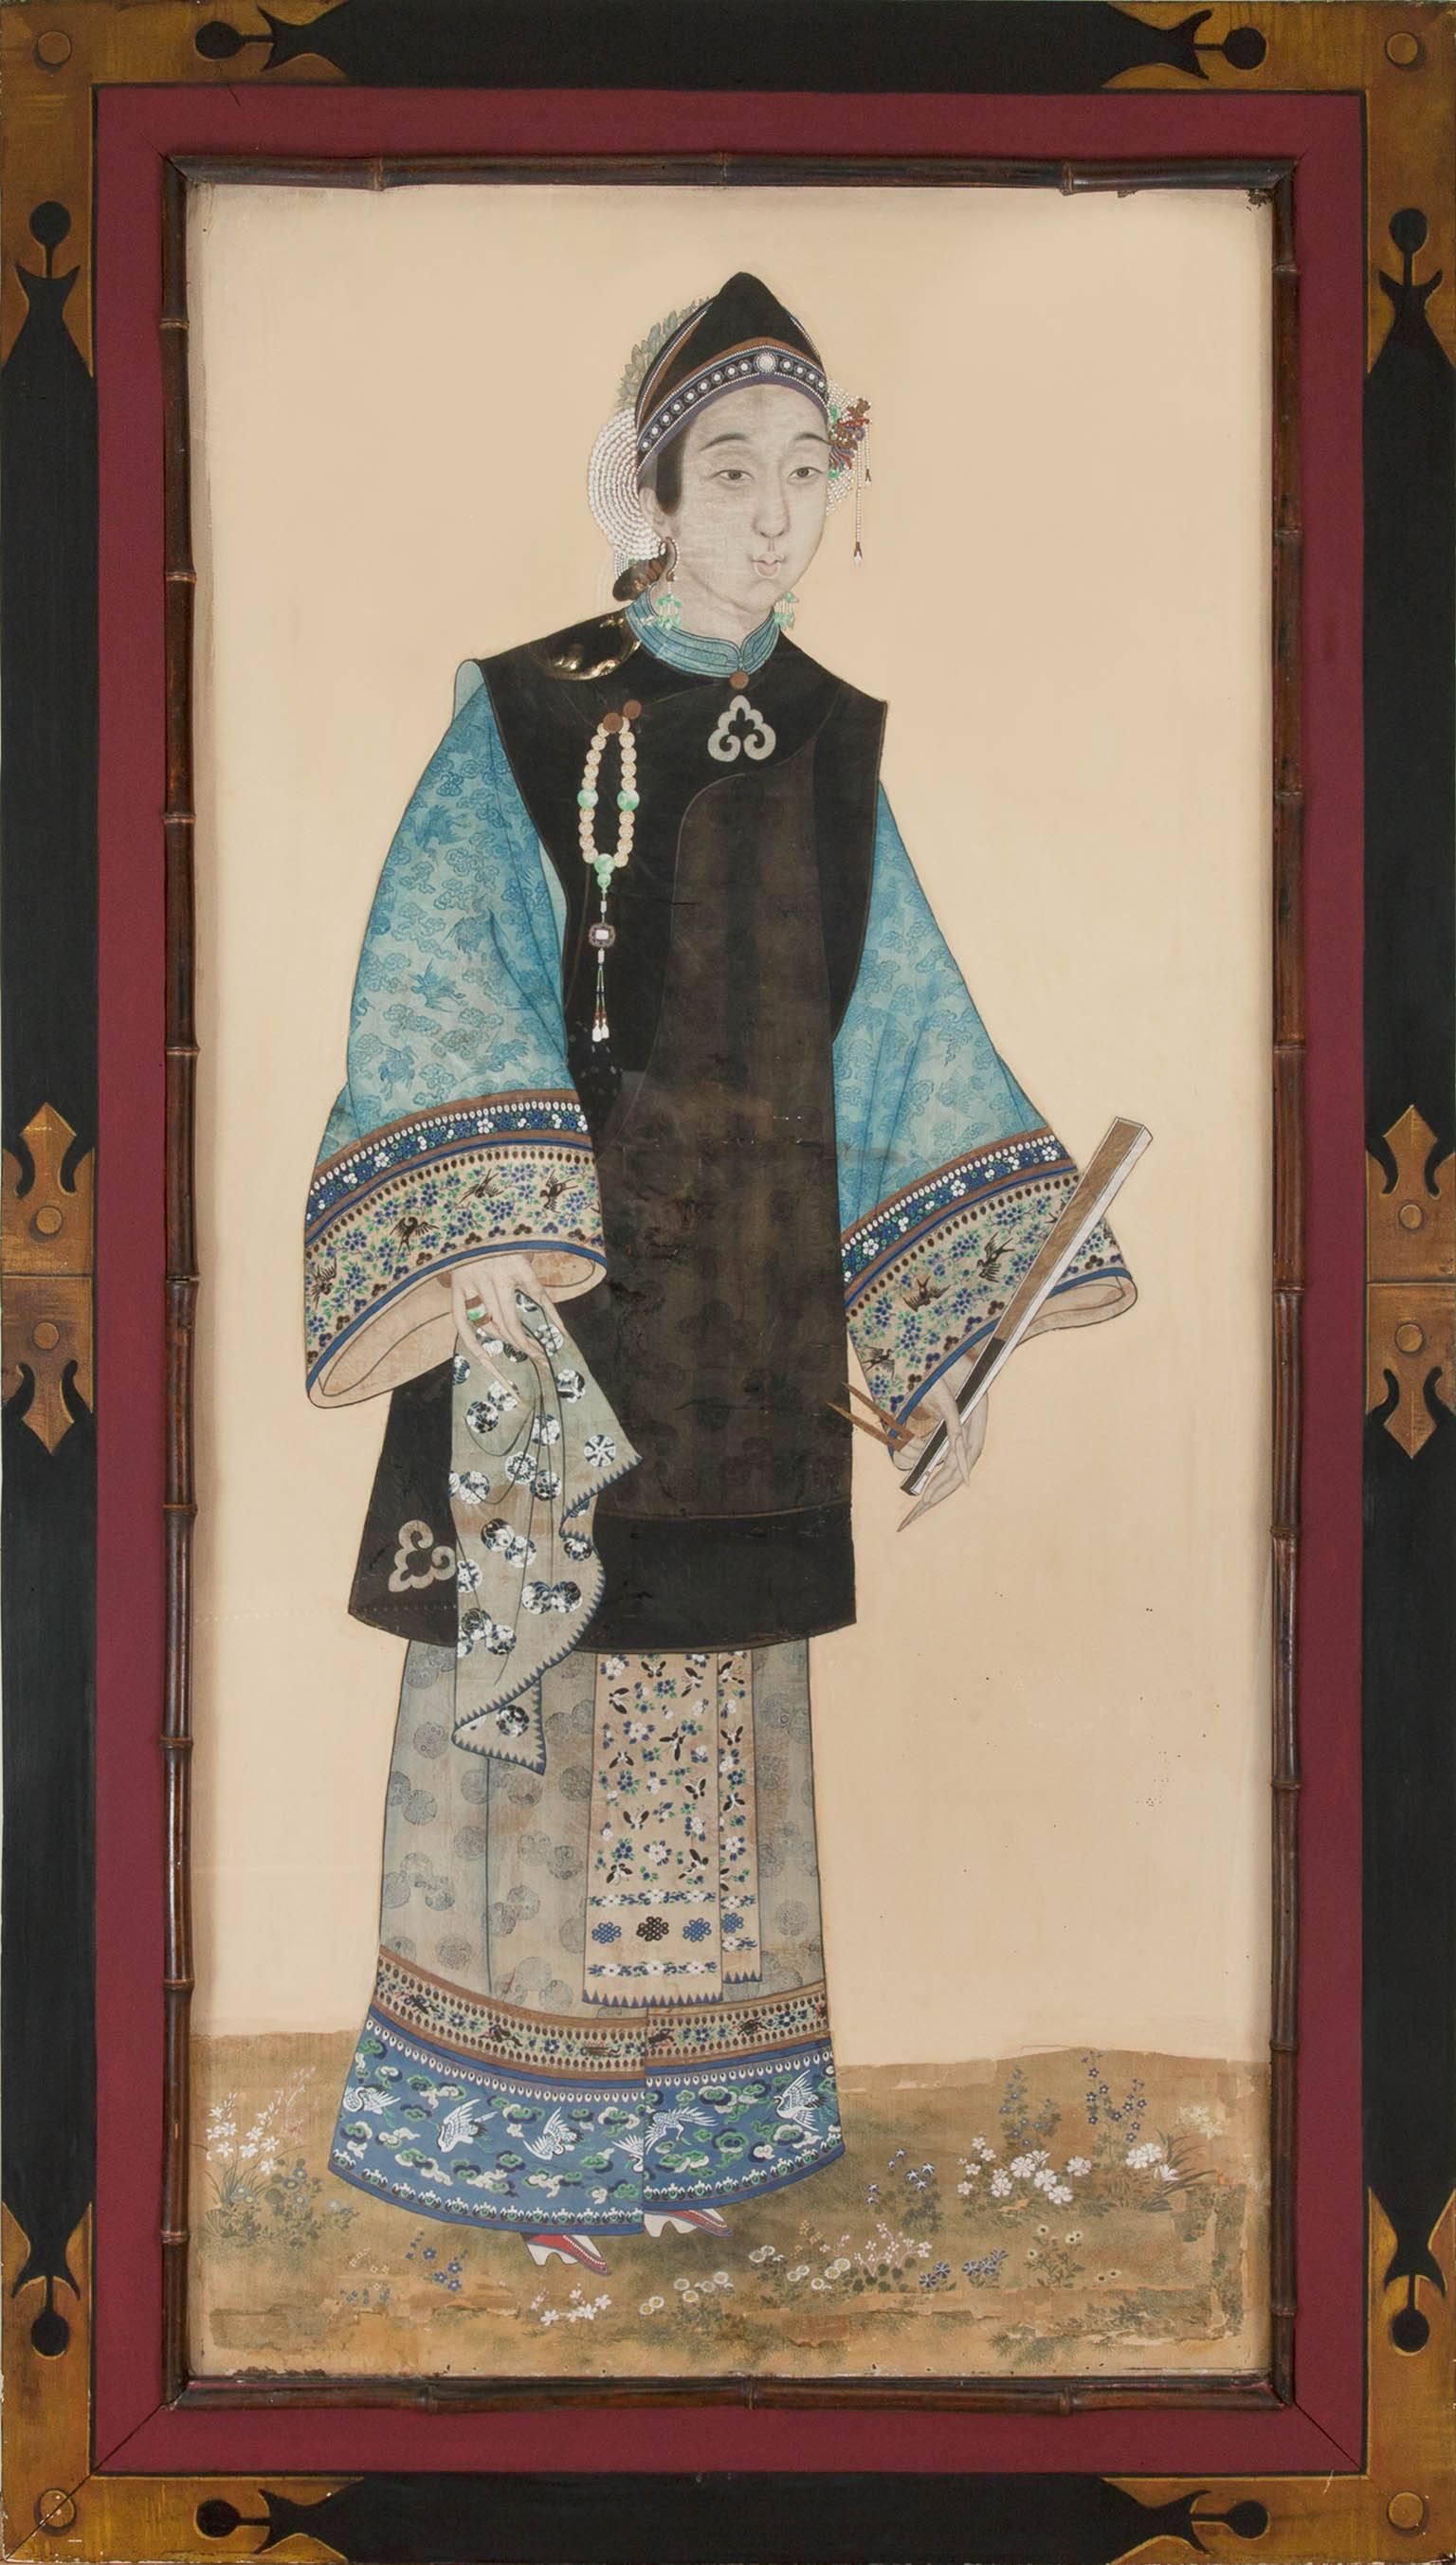 A pair of mid-19th century Chinese Portraits. The two figures standing on a base of finely painted flowers, their costumes with minute detailing of flowers
butterflies and decoration in the Chinese taste. The man wears a decorated black tunic with